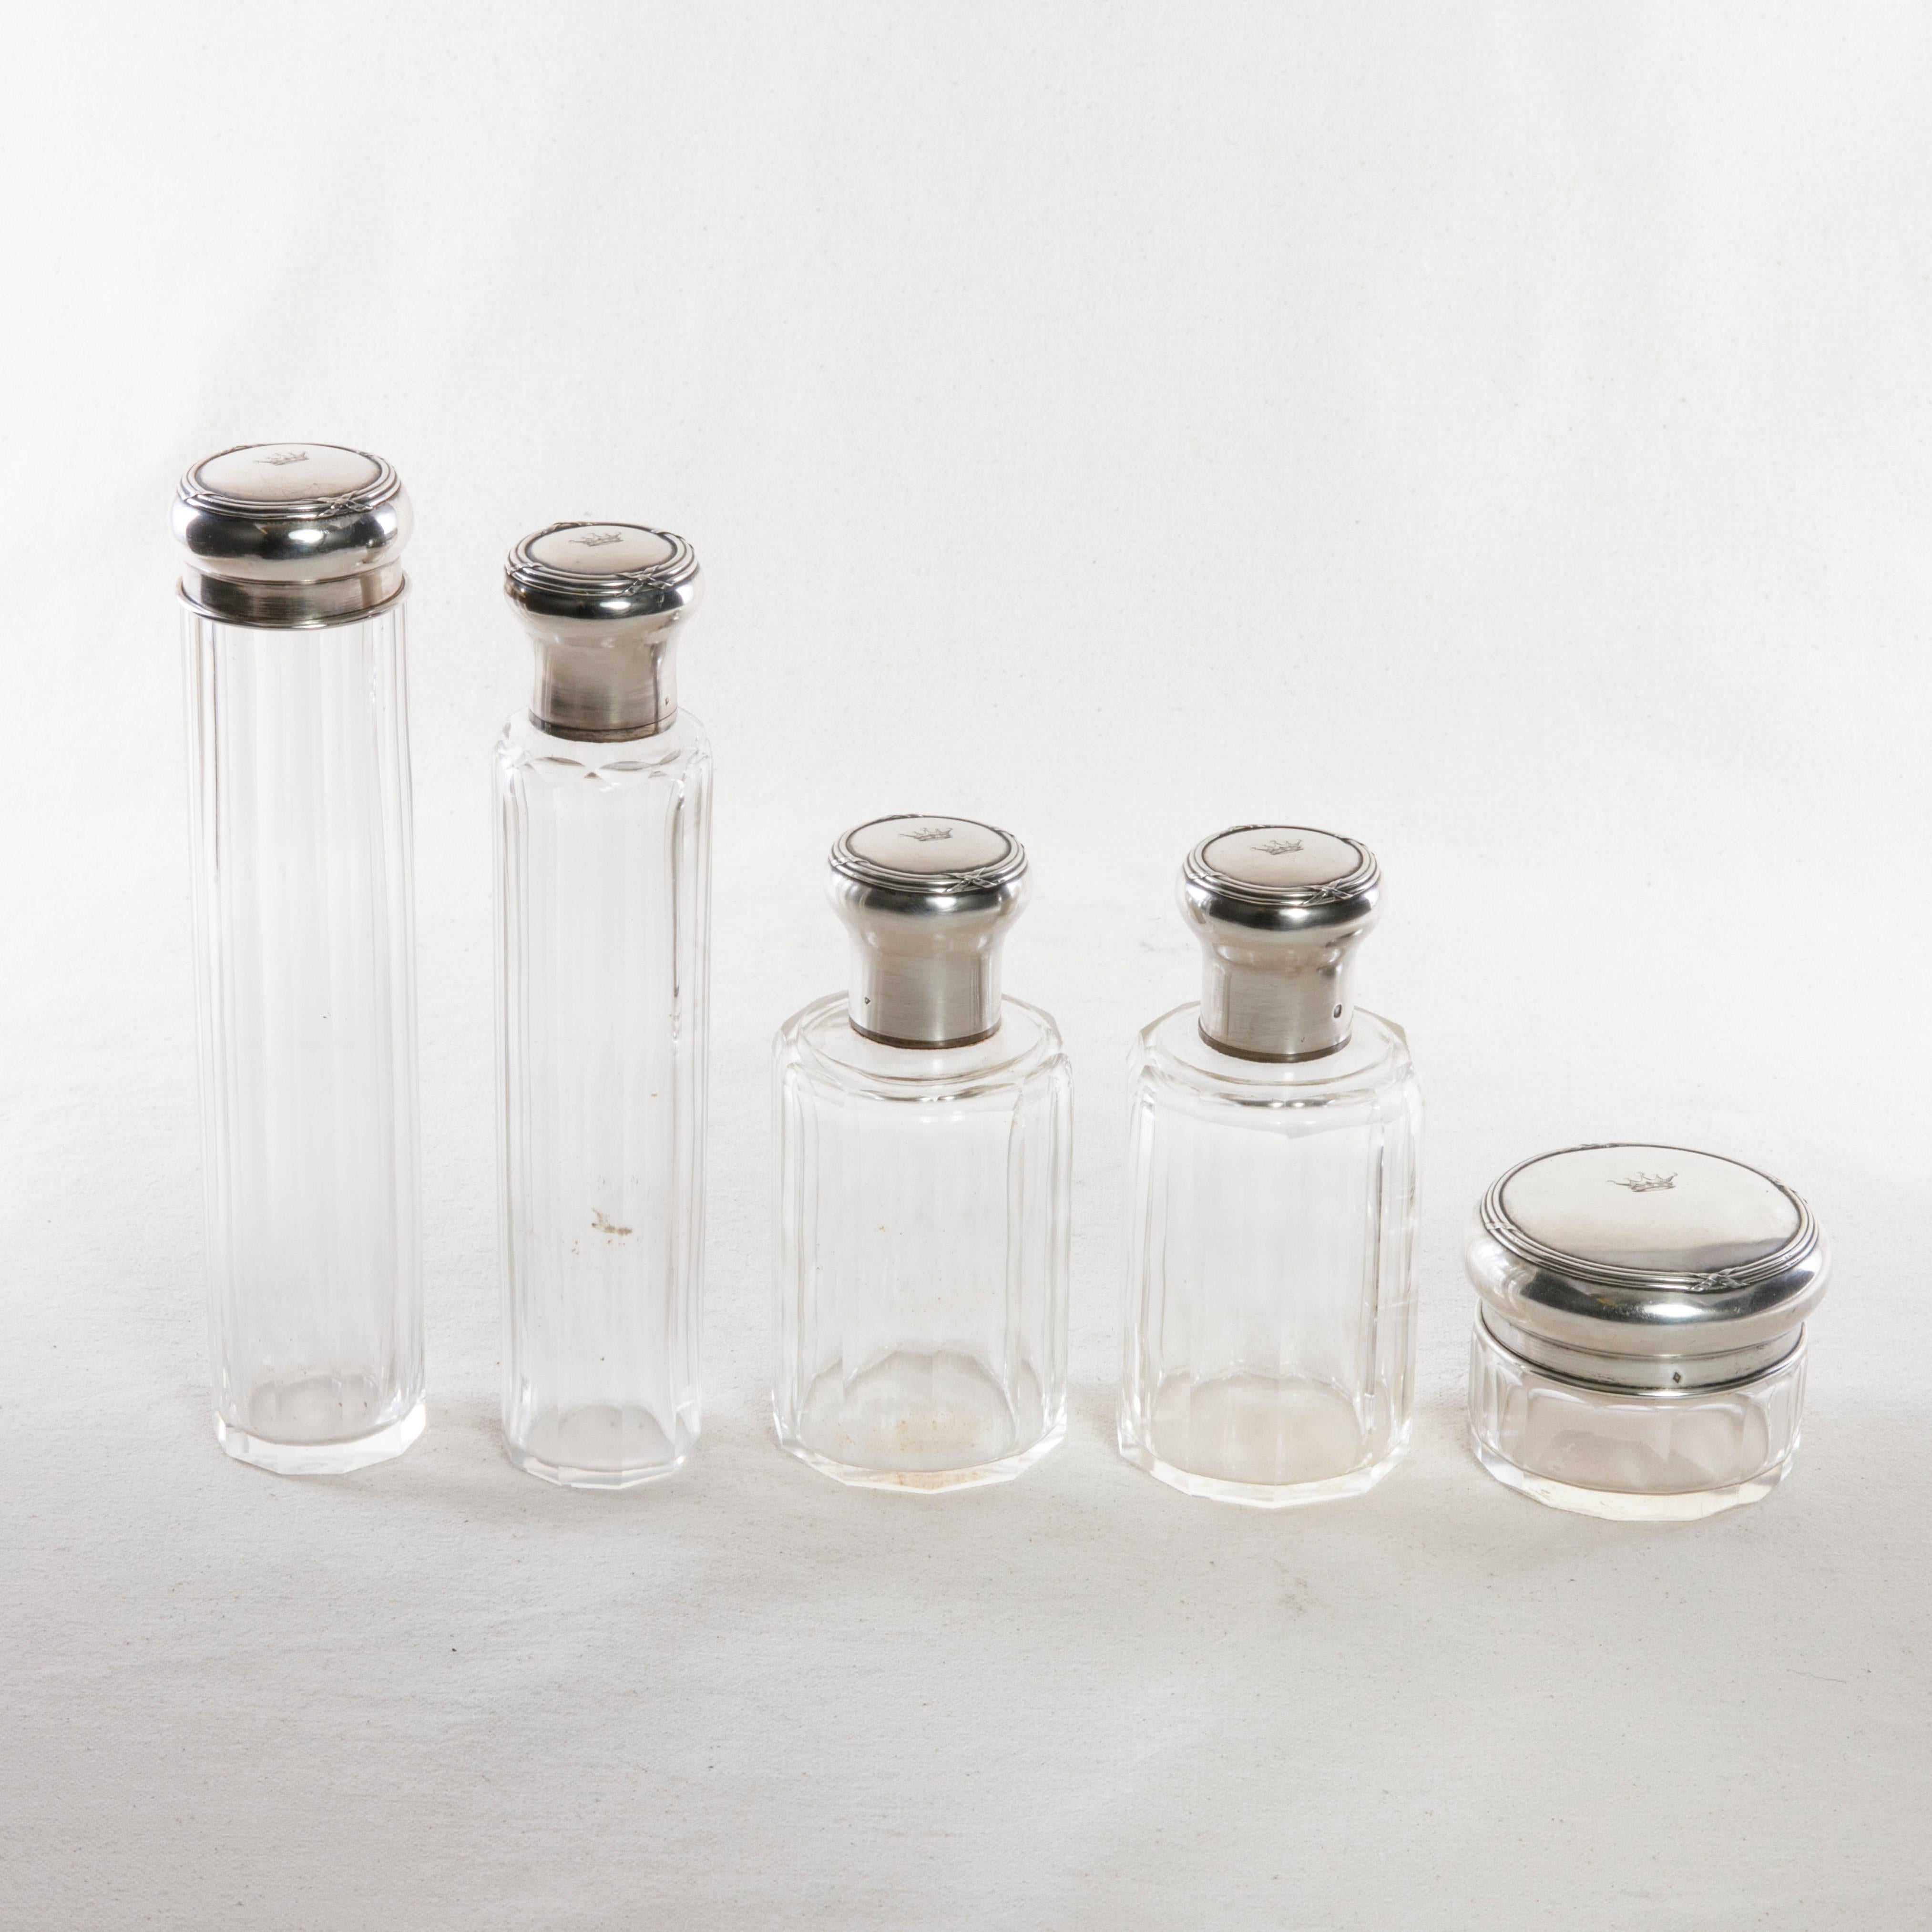 This set of five crystal vanity bottles features sterling silver lids with Louis XVI detailing. The engraved crowns on the lids indicate their previous ownership by a French count. The inside of the lids are marked E. Pinteaux Paris, a known